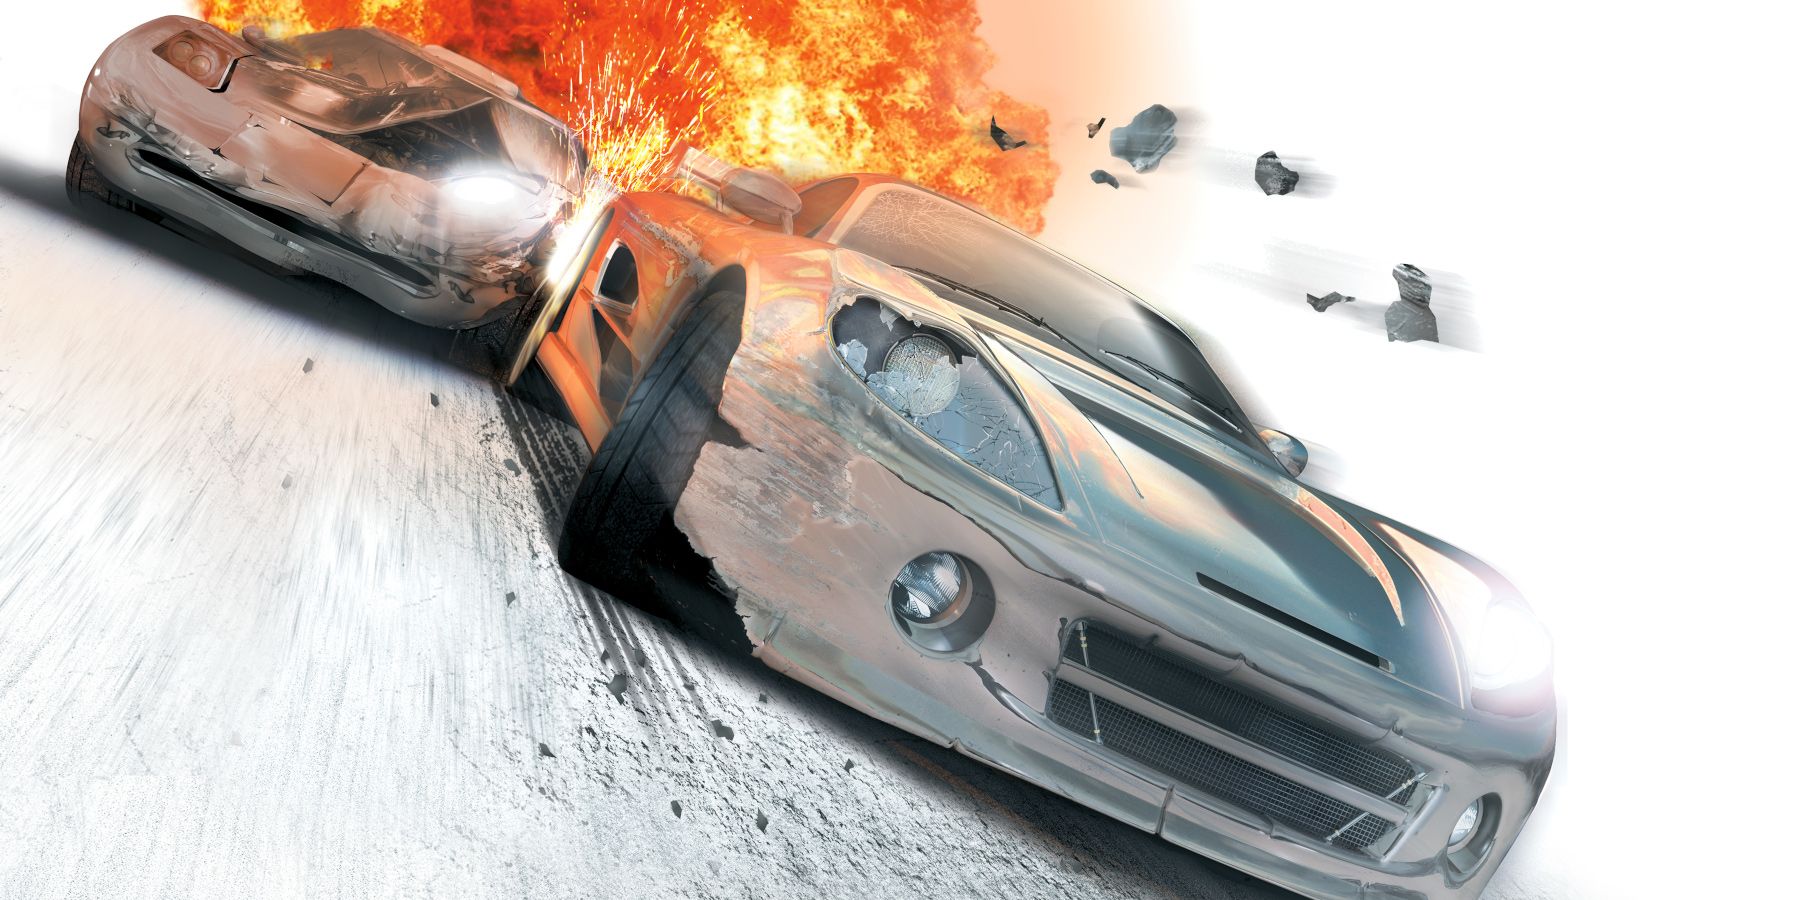 Box art for Burnout 3: Takedown - cars driving with an explosion behind them